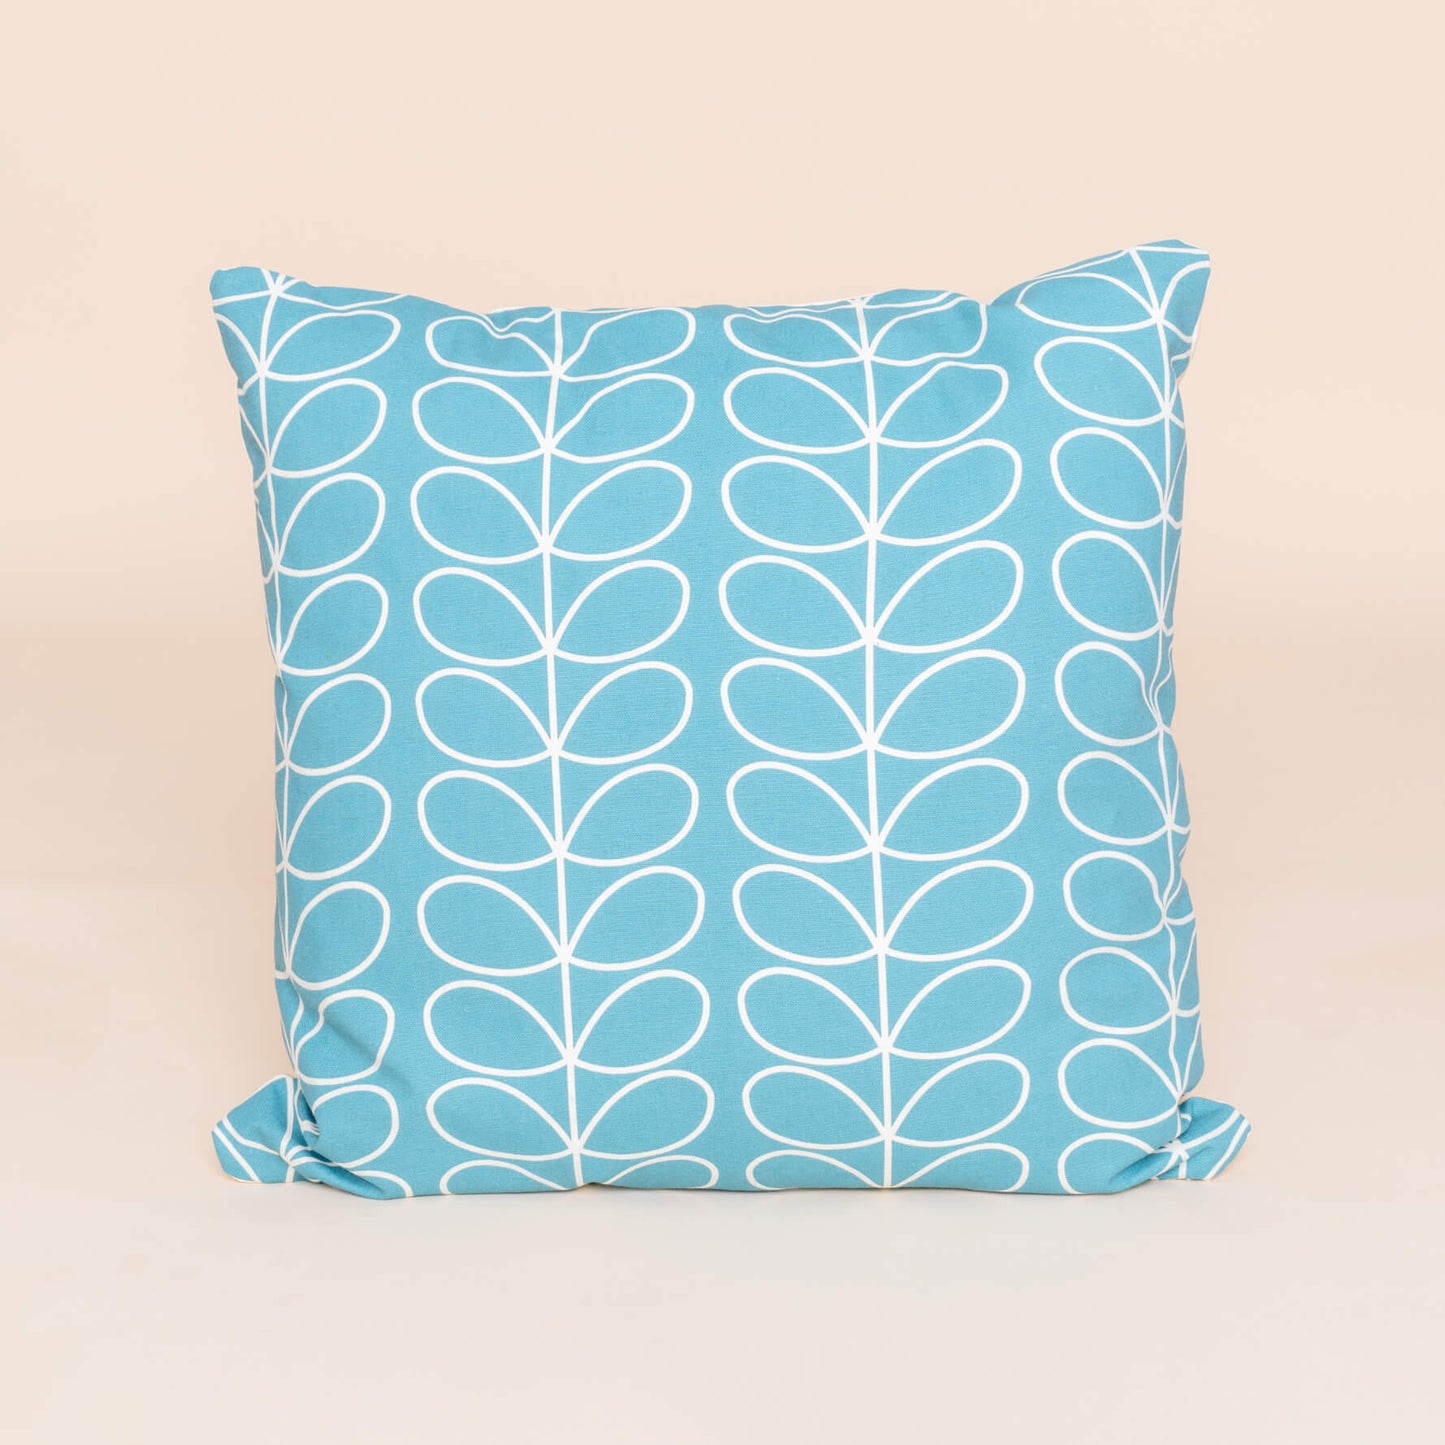 Orla Kiely Linear Stem 20x20" Cushion Covers in Deep Duck Egg (turquoise)